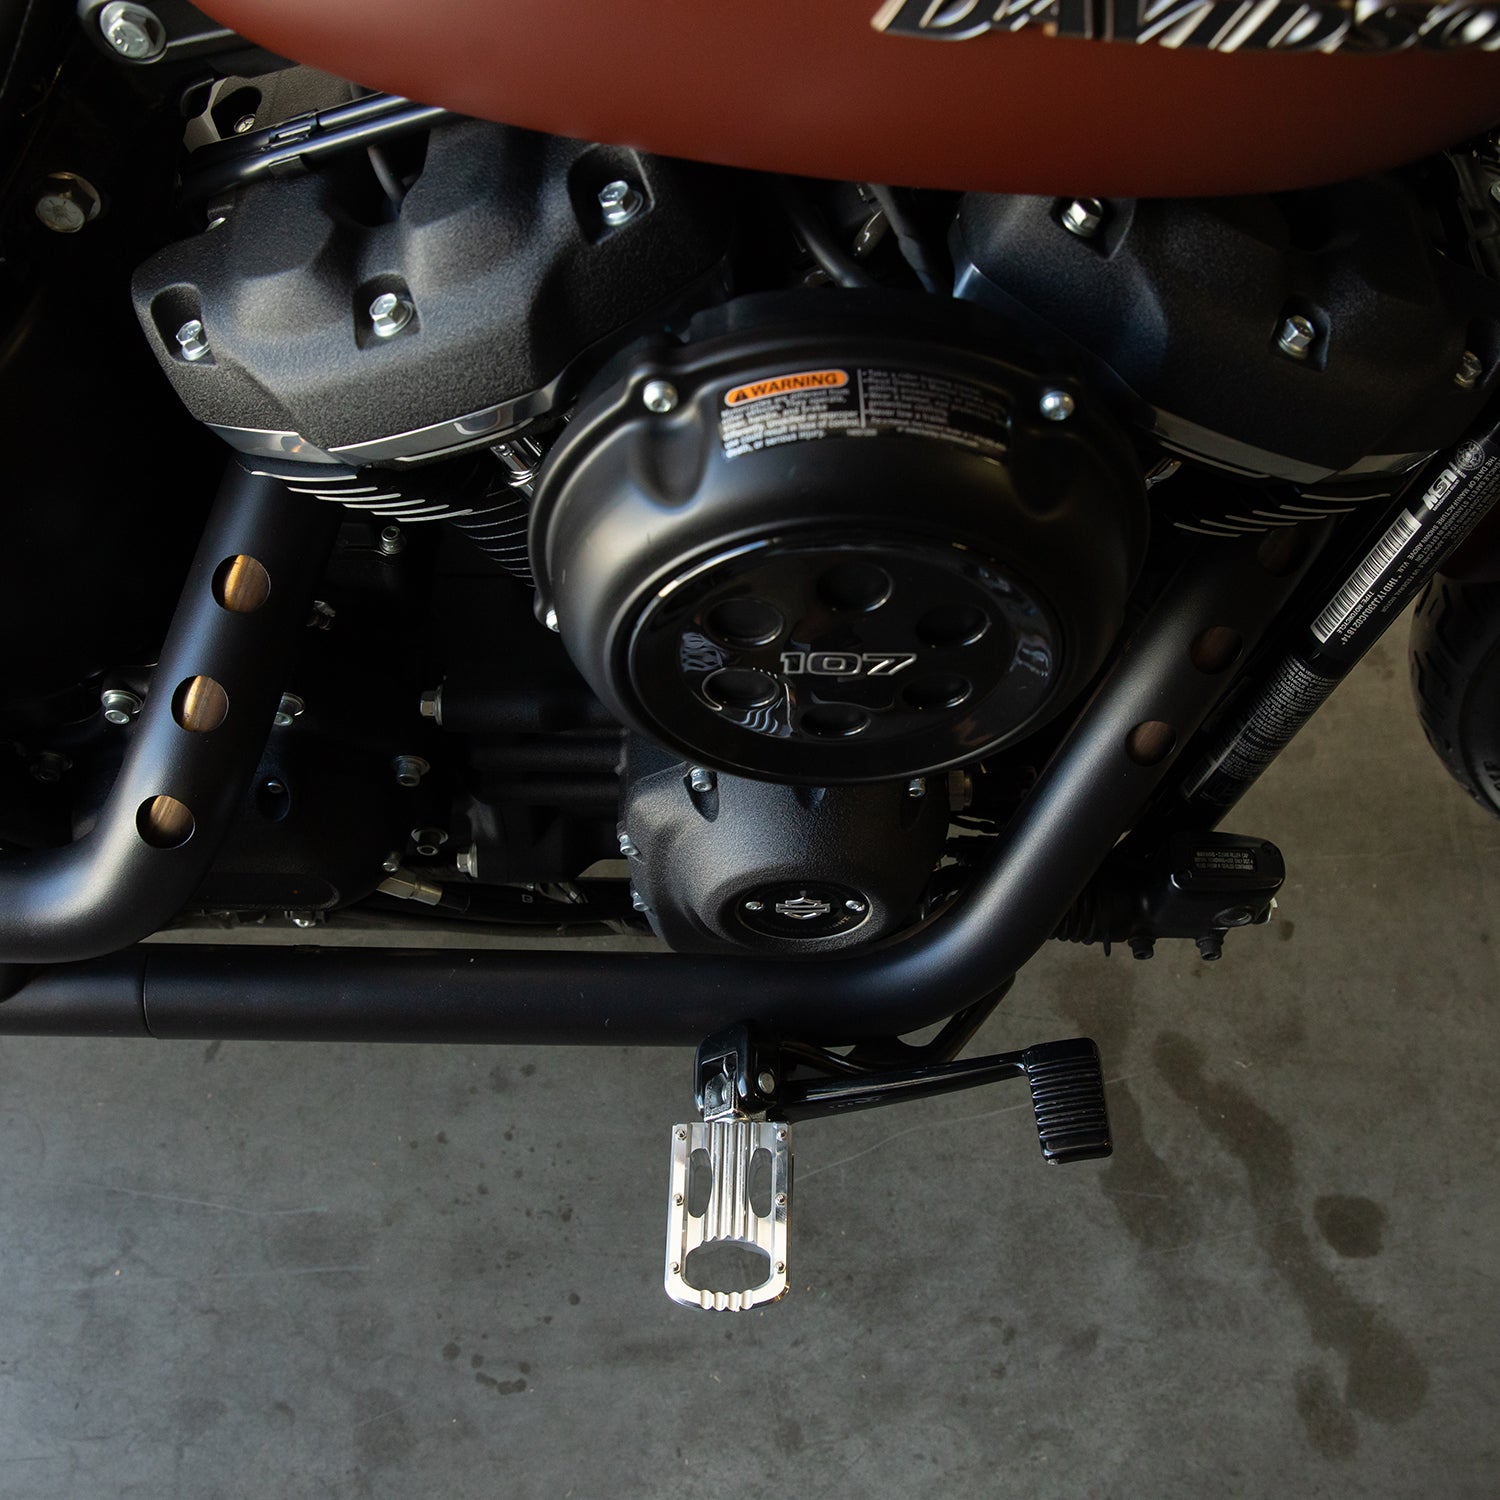 Punisher Foot Pegs HD Rider - Polished